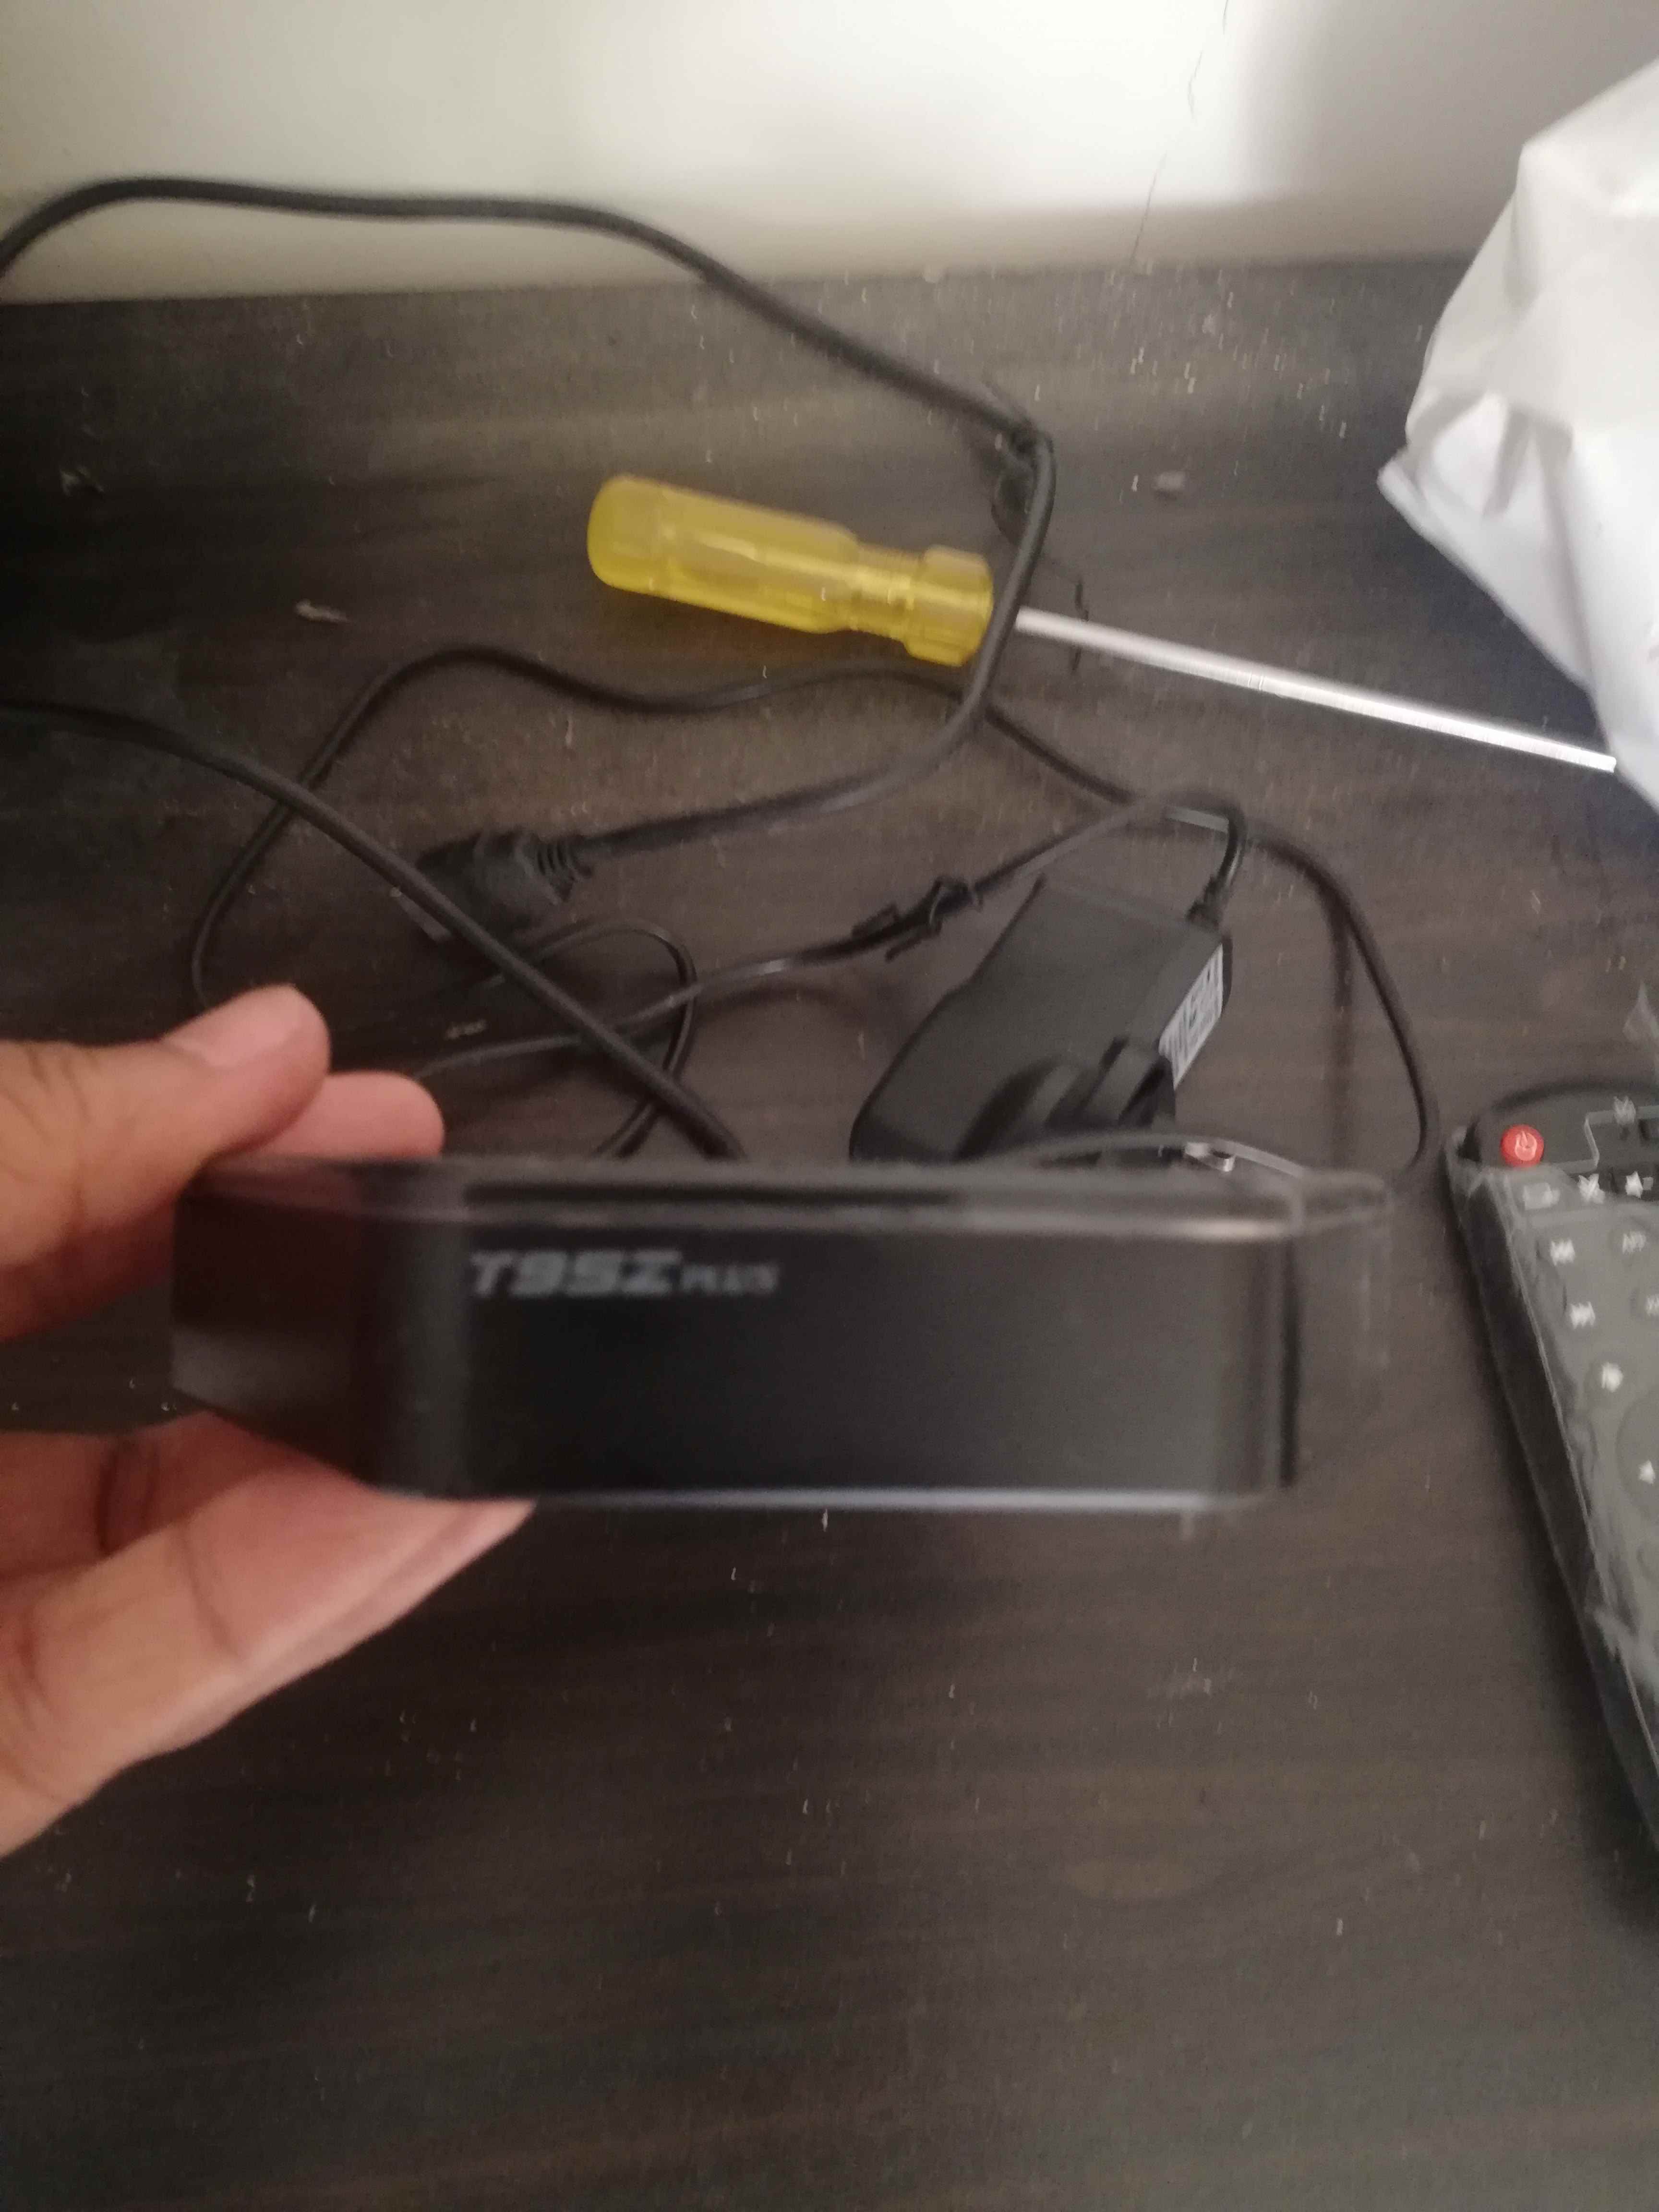 TV RECEIVER WITH 5 MONTHS SUBSCRIPTION